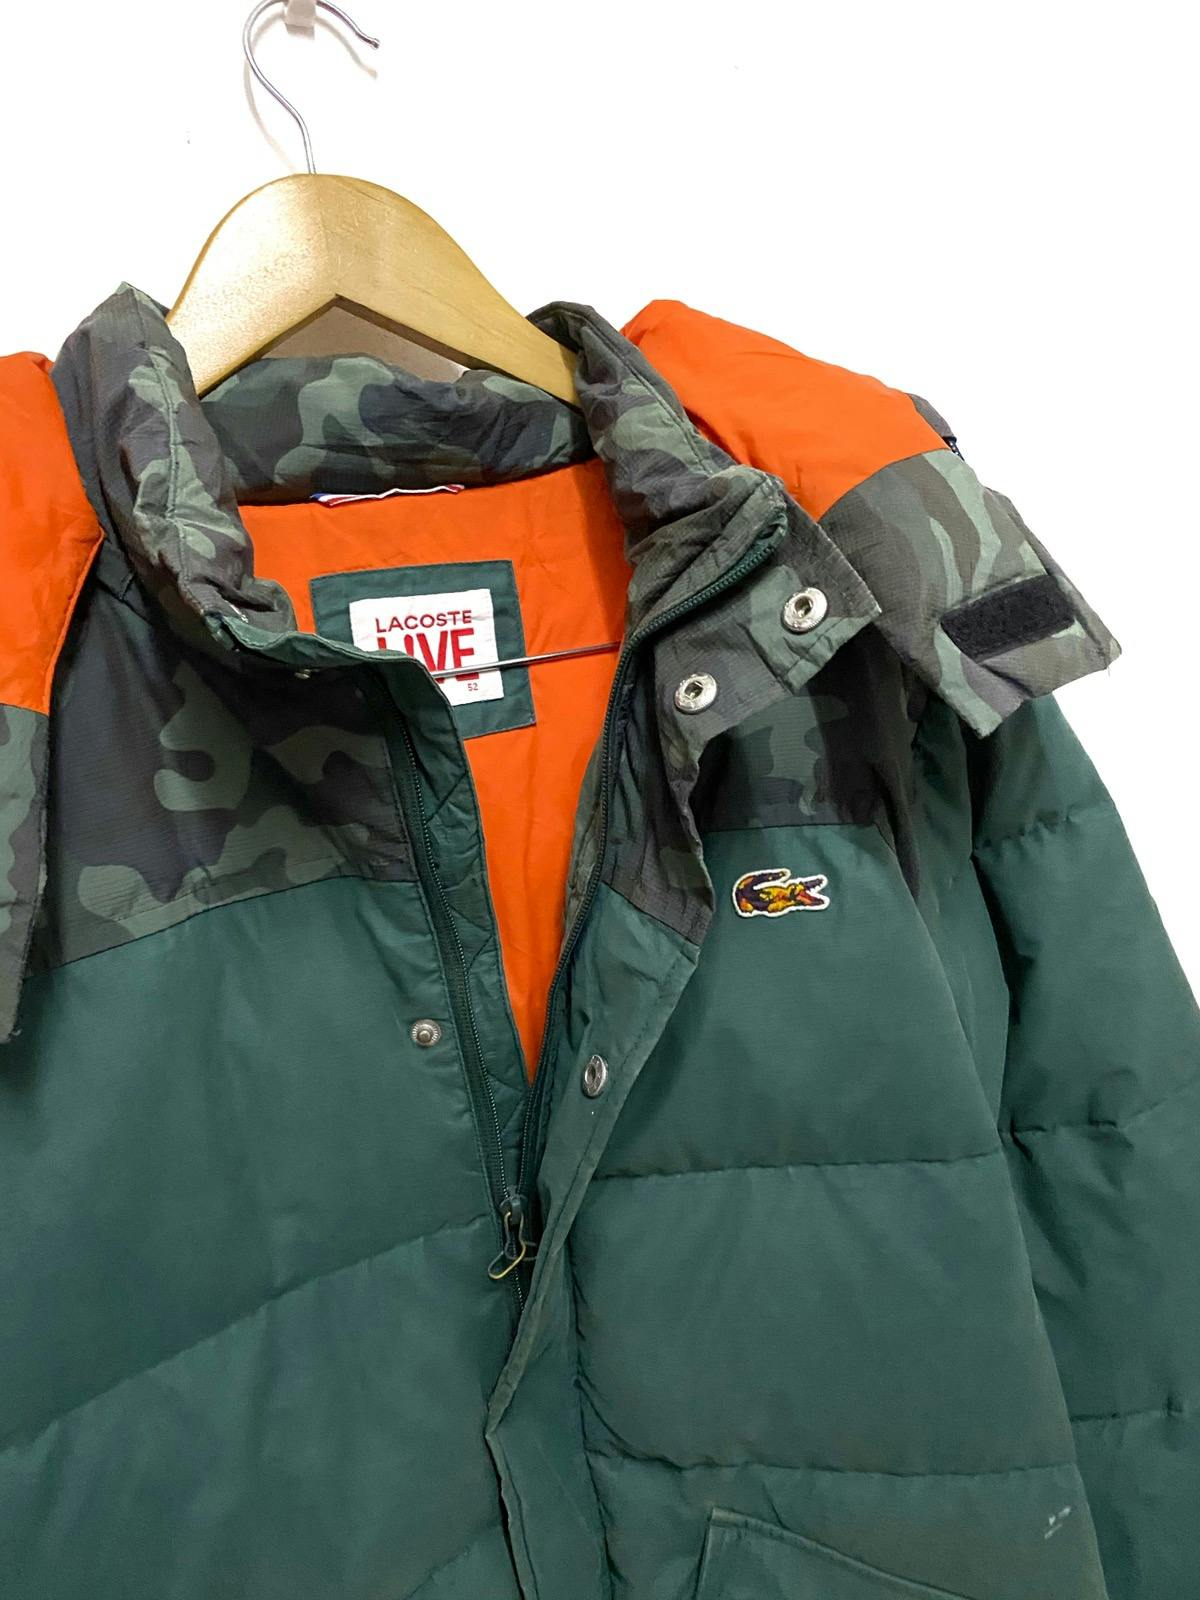 Lacoste Live Puffer Down Camo Jacket - 7